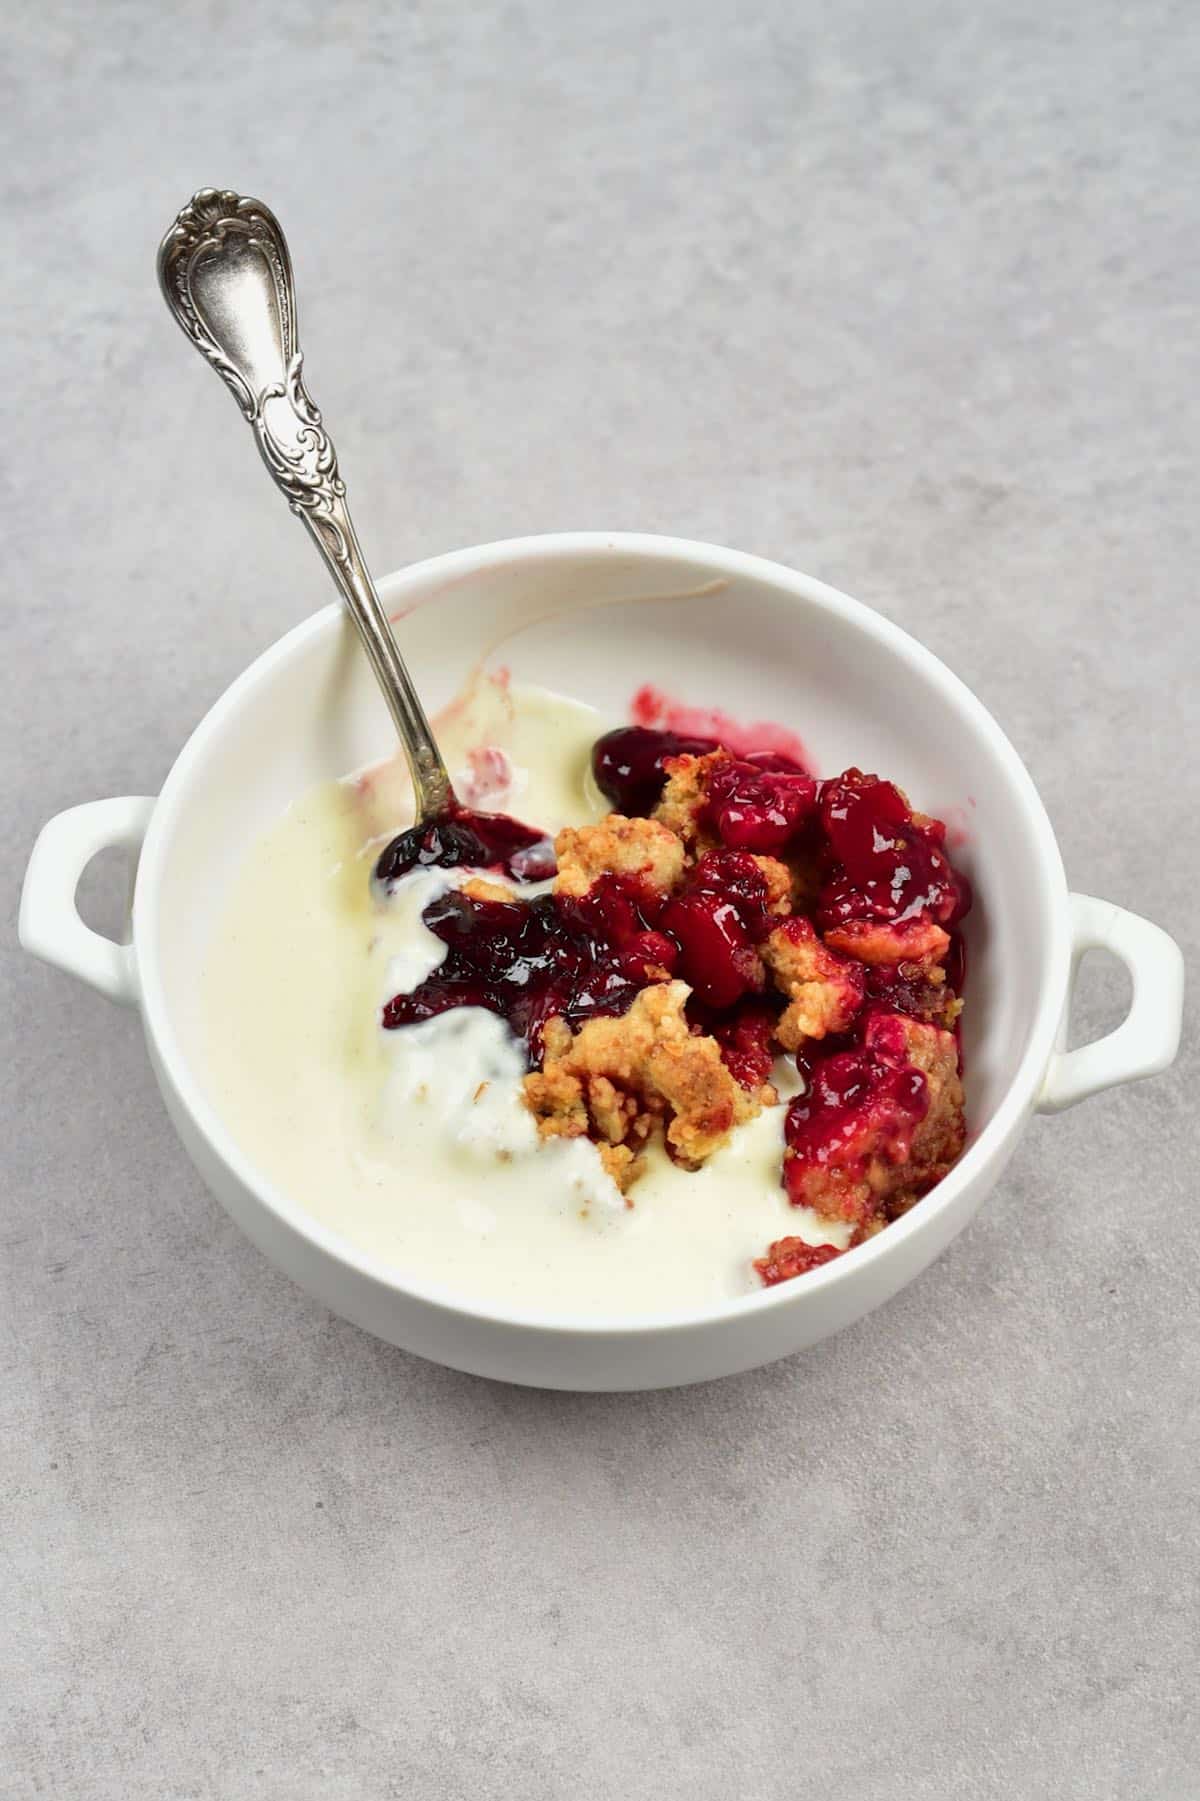 A small bowl with berry crumble and custard